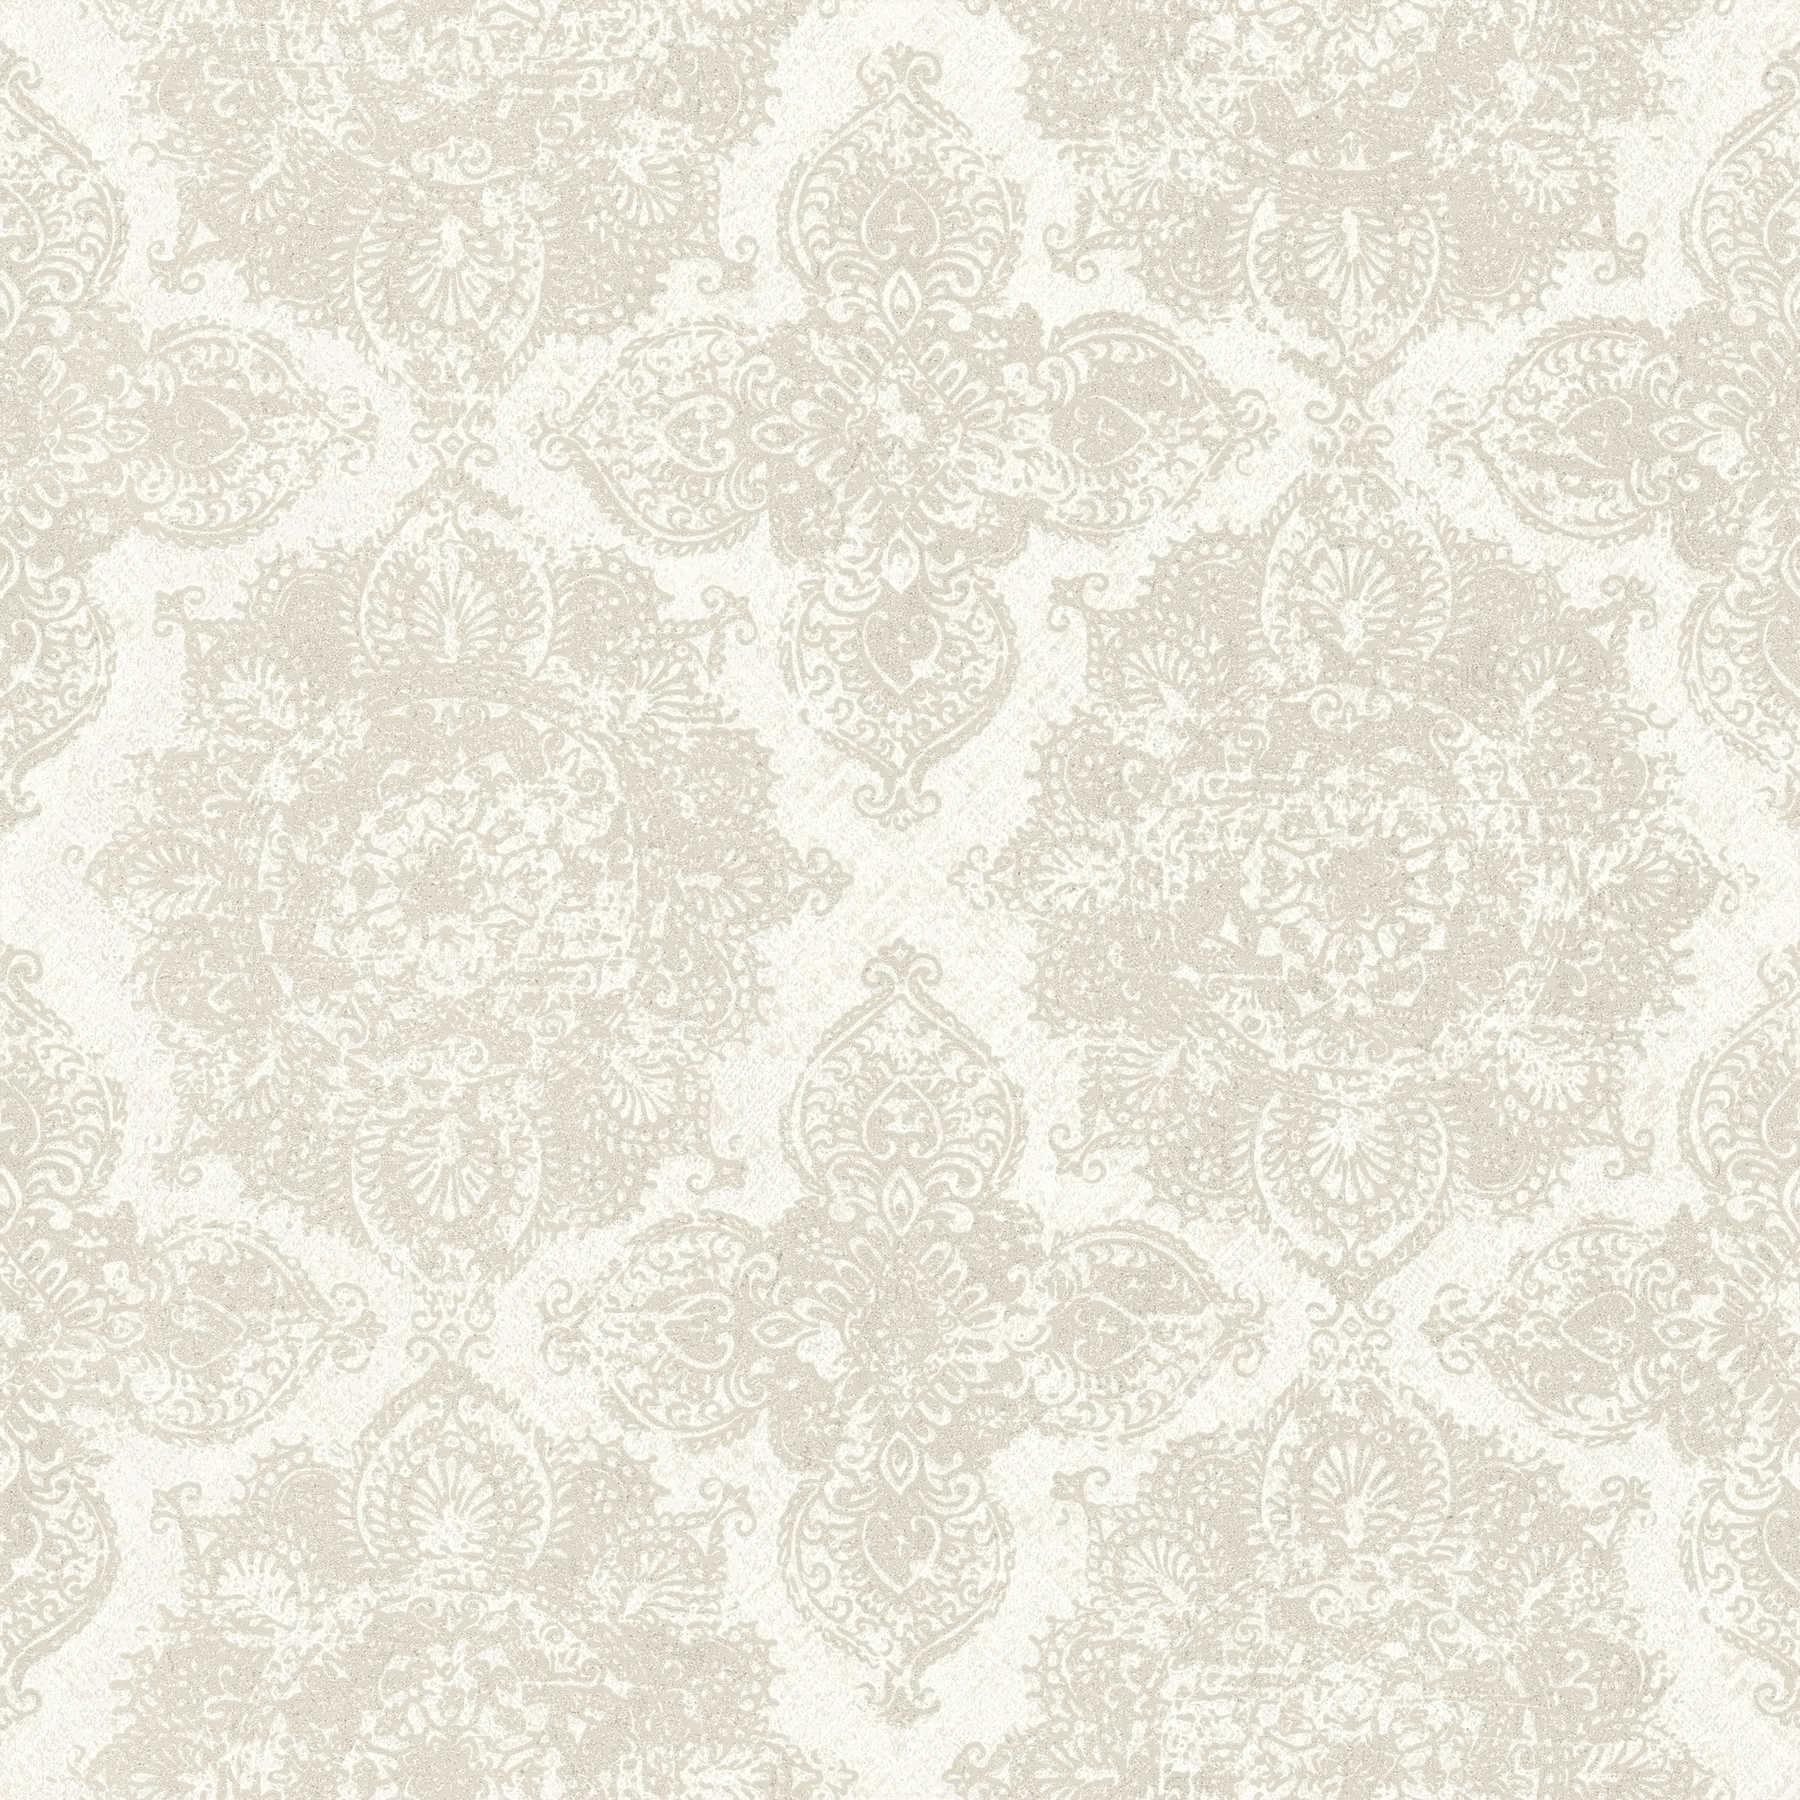 Bohemian wallpaper with detailed design - beige, grey
